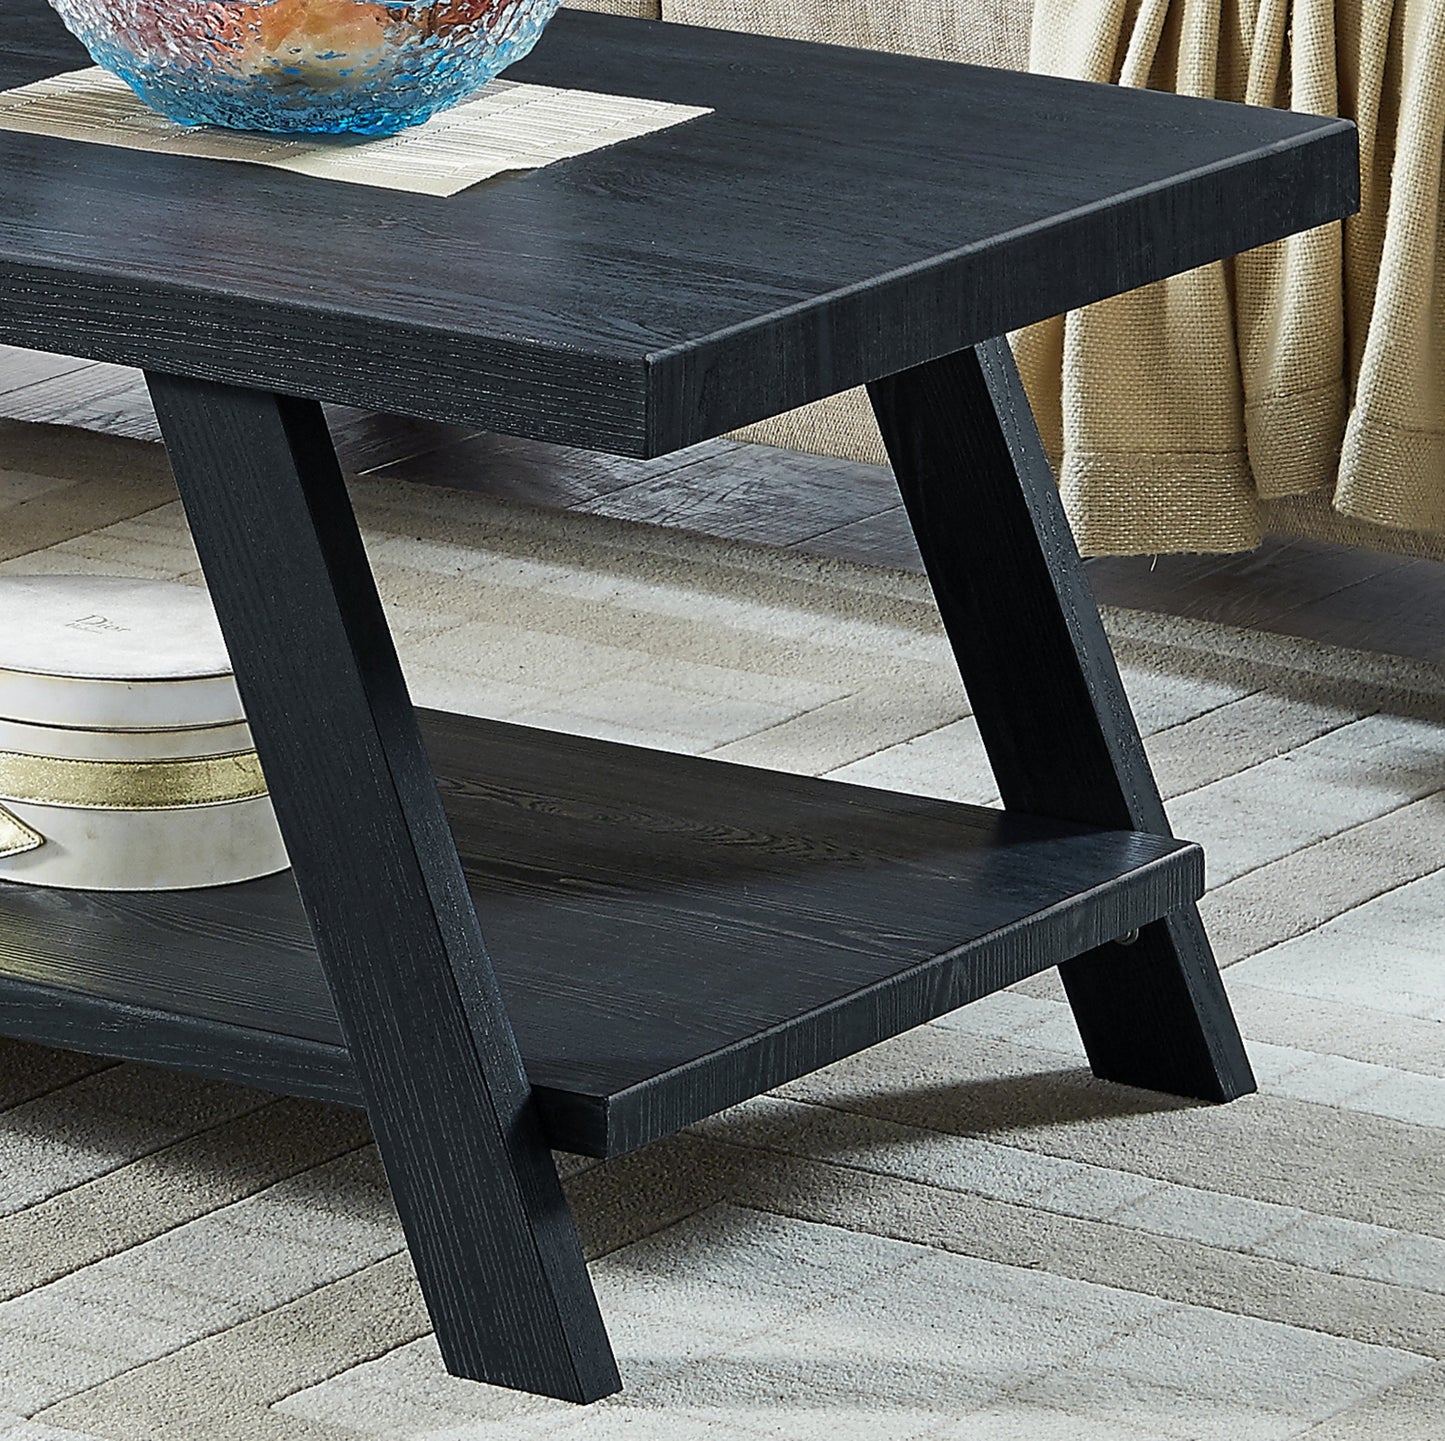 Athens Contemporary Replicated Wood Shelf Coffee Table in Black Finish